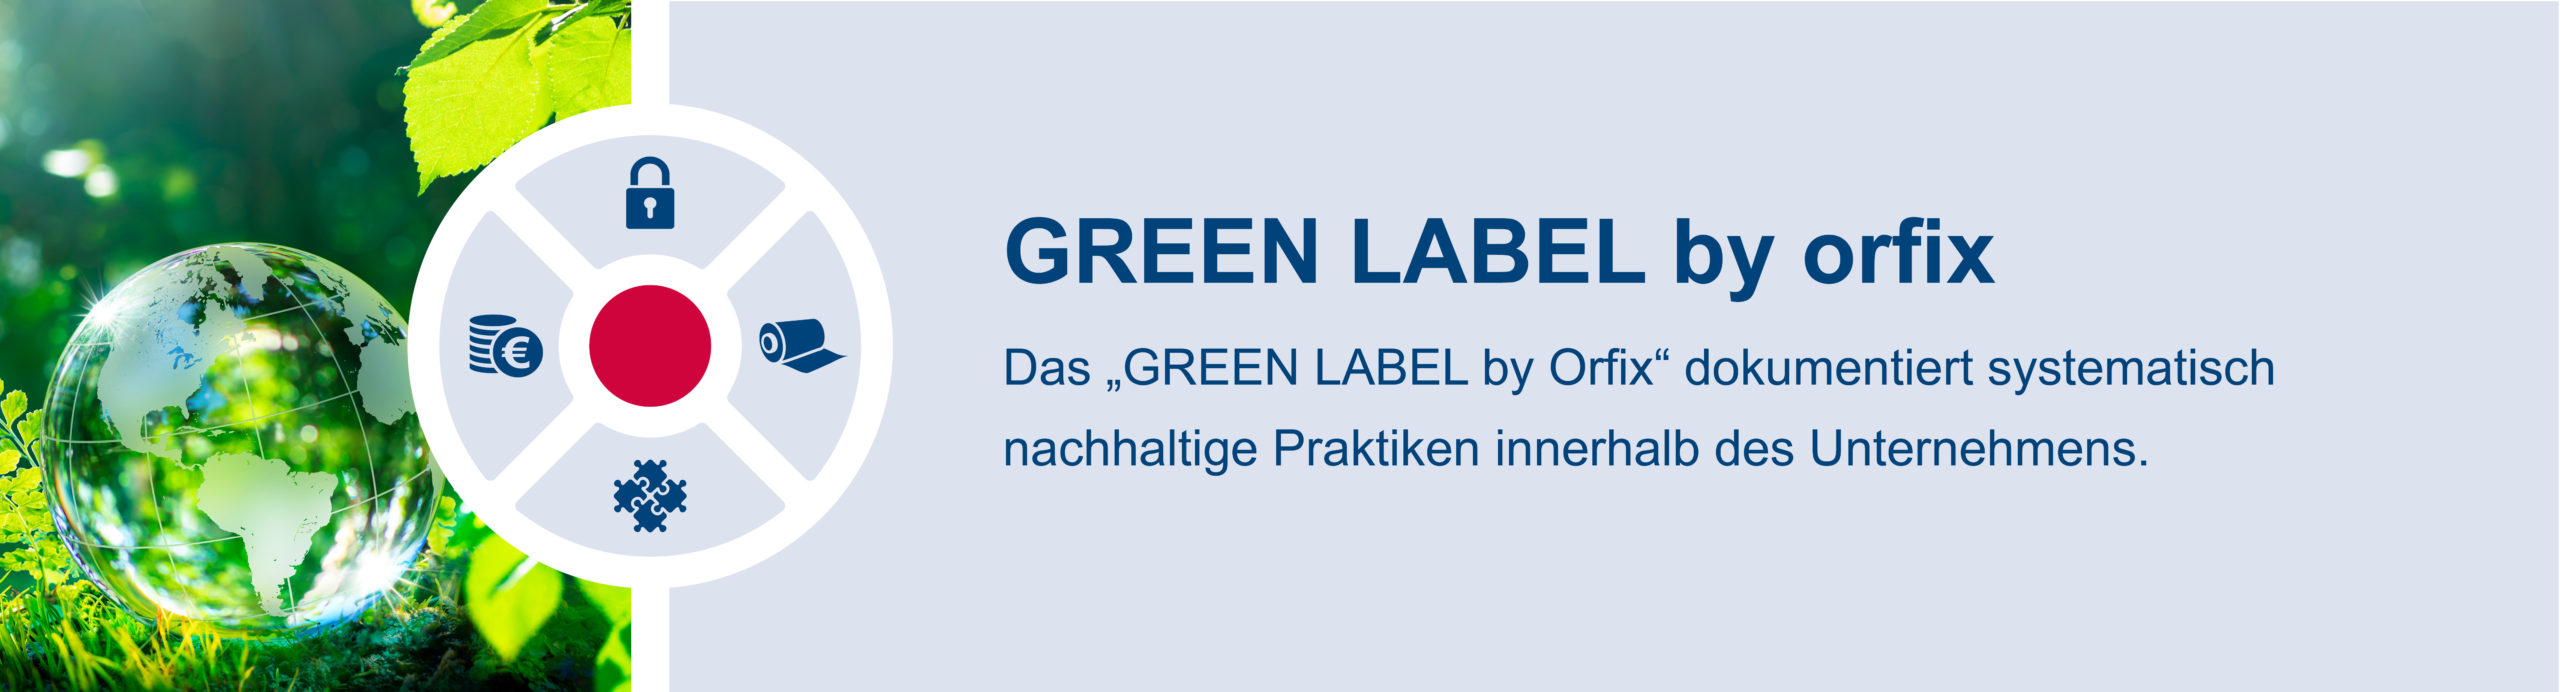 Green Lable by orfix